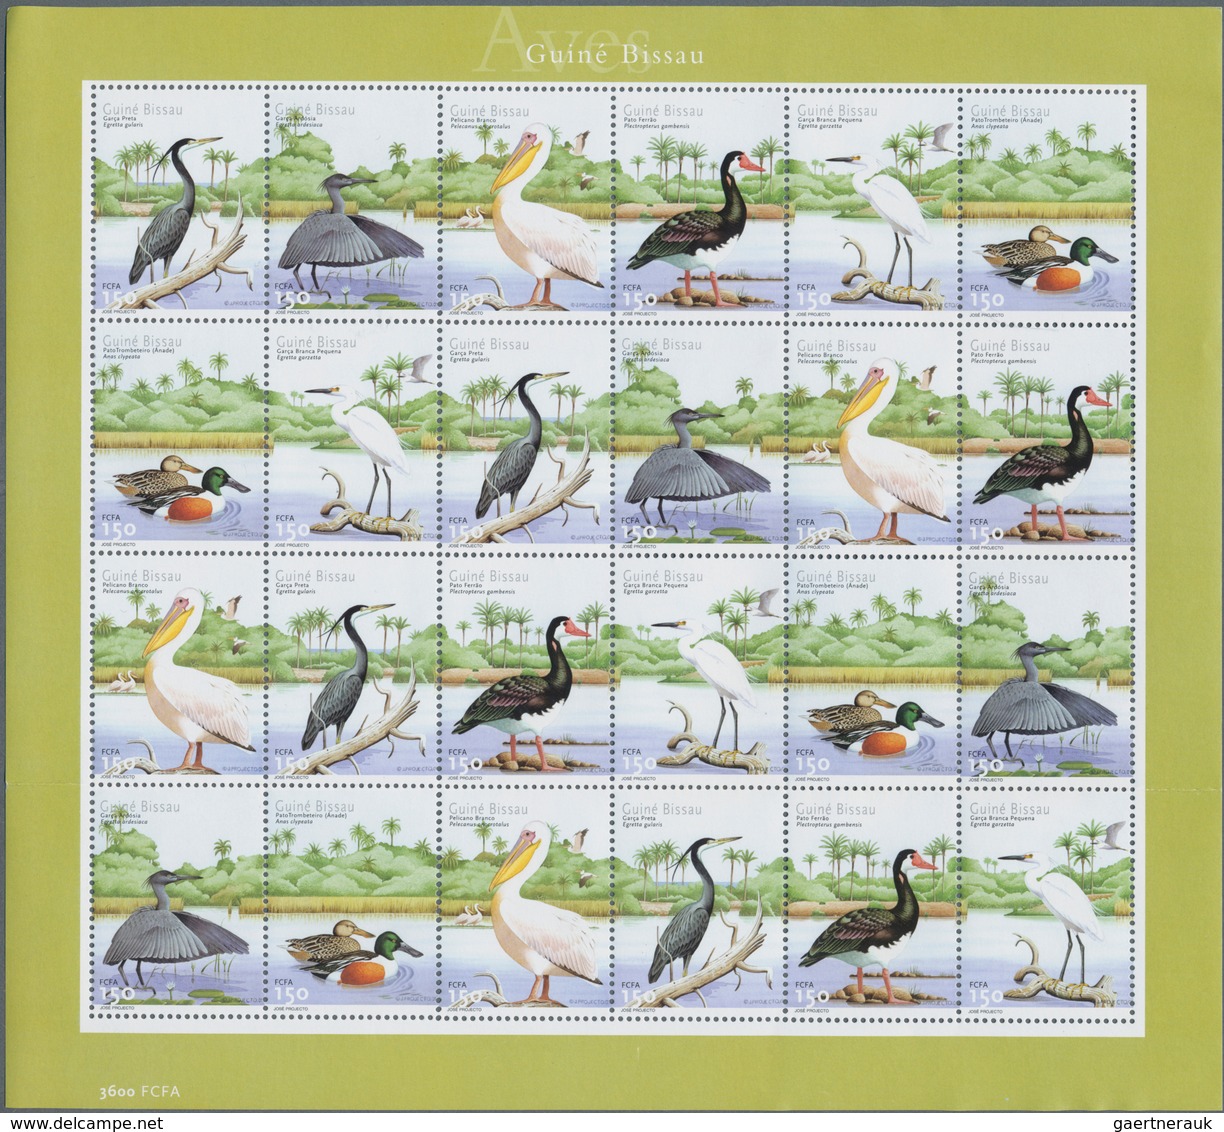 Guinea-Bissau: 2001/2002, stock of thousands of complete sets (often in units or sheets) and souveni